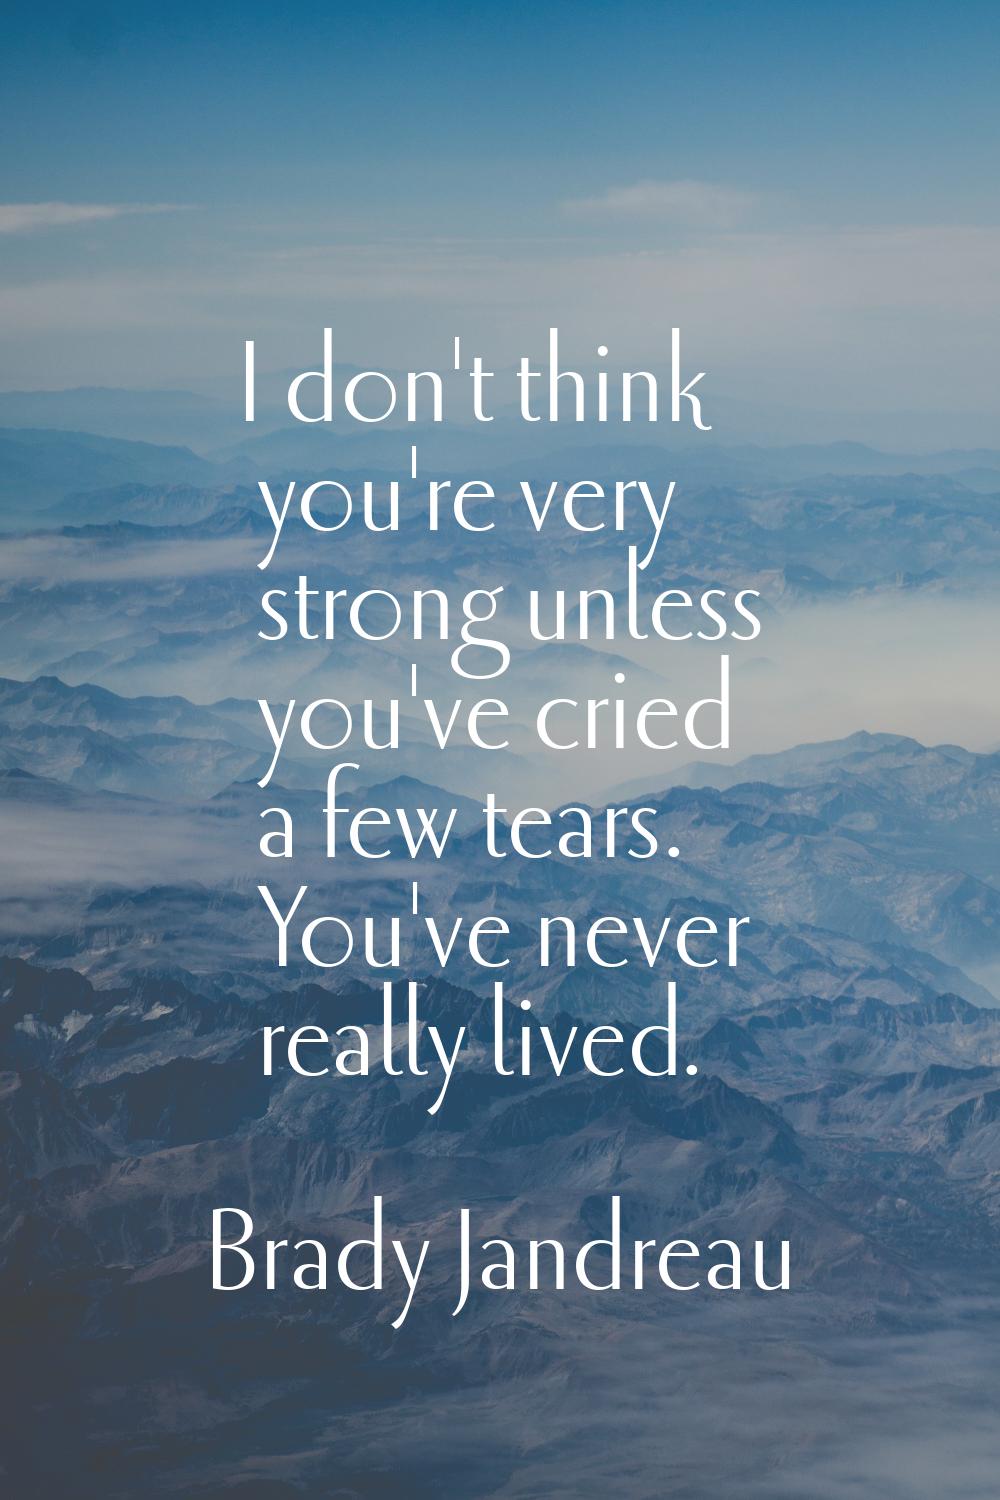 I don't think you're very strong unless you've cried a few tears. You've never really lived.